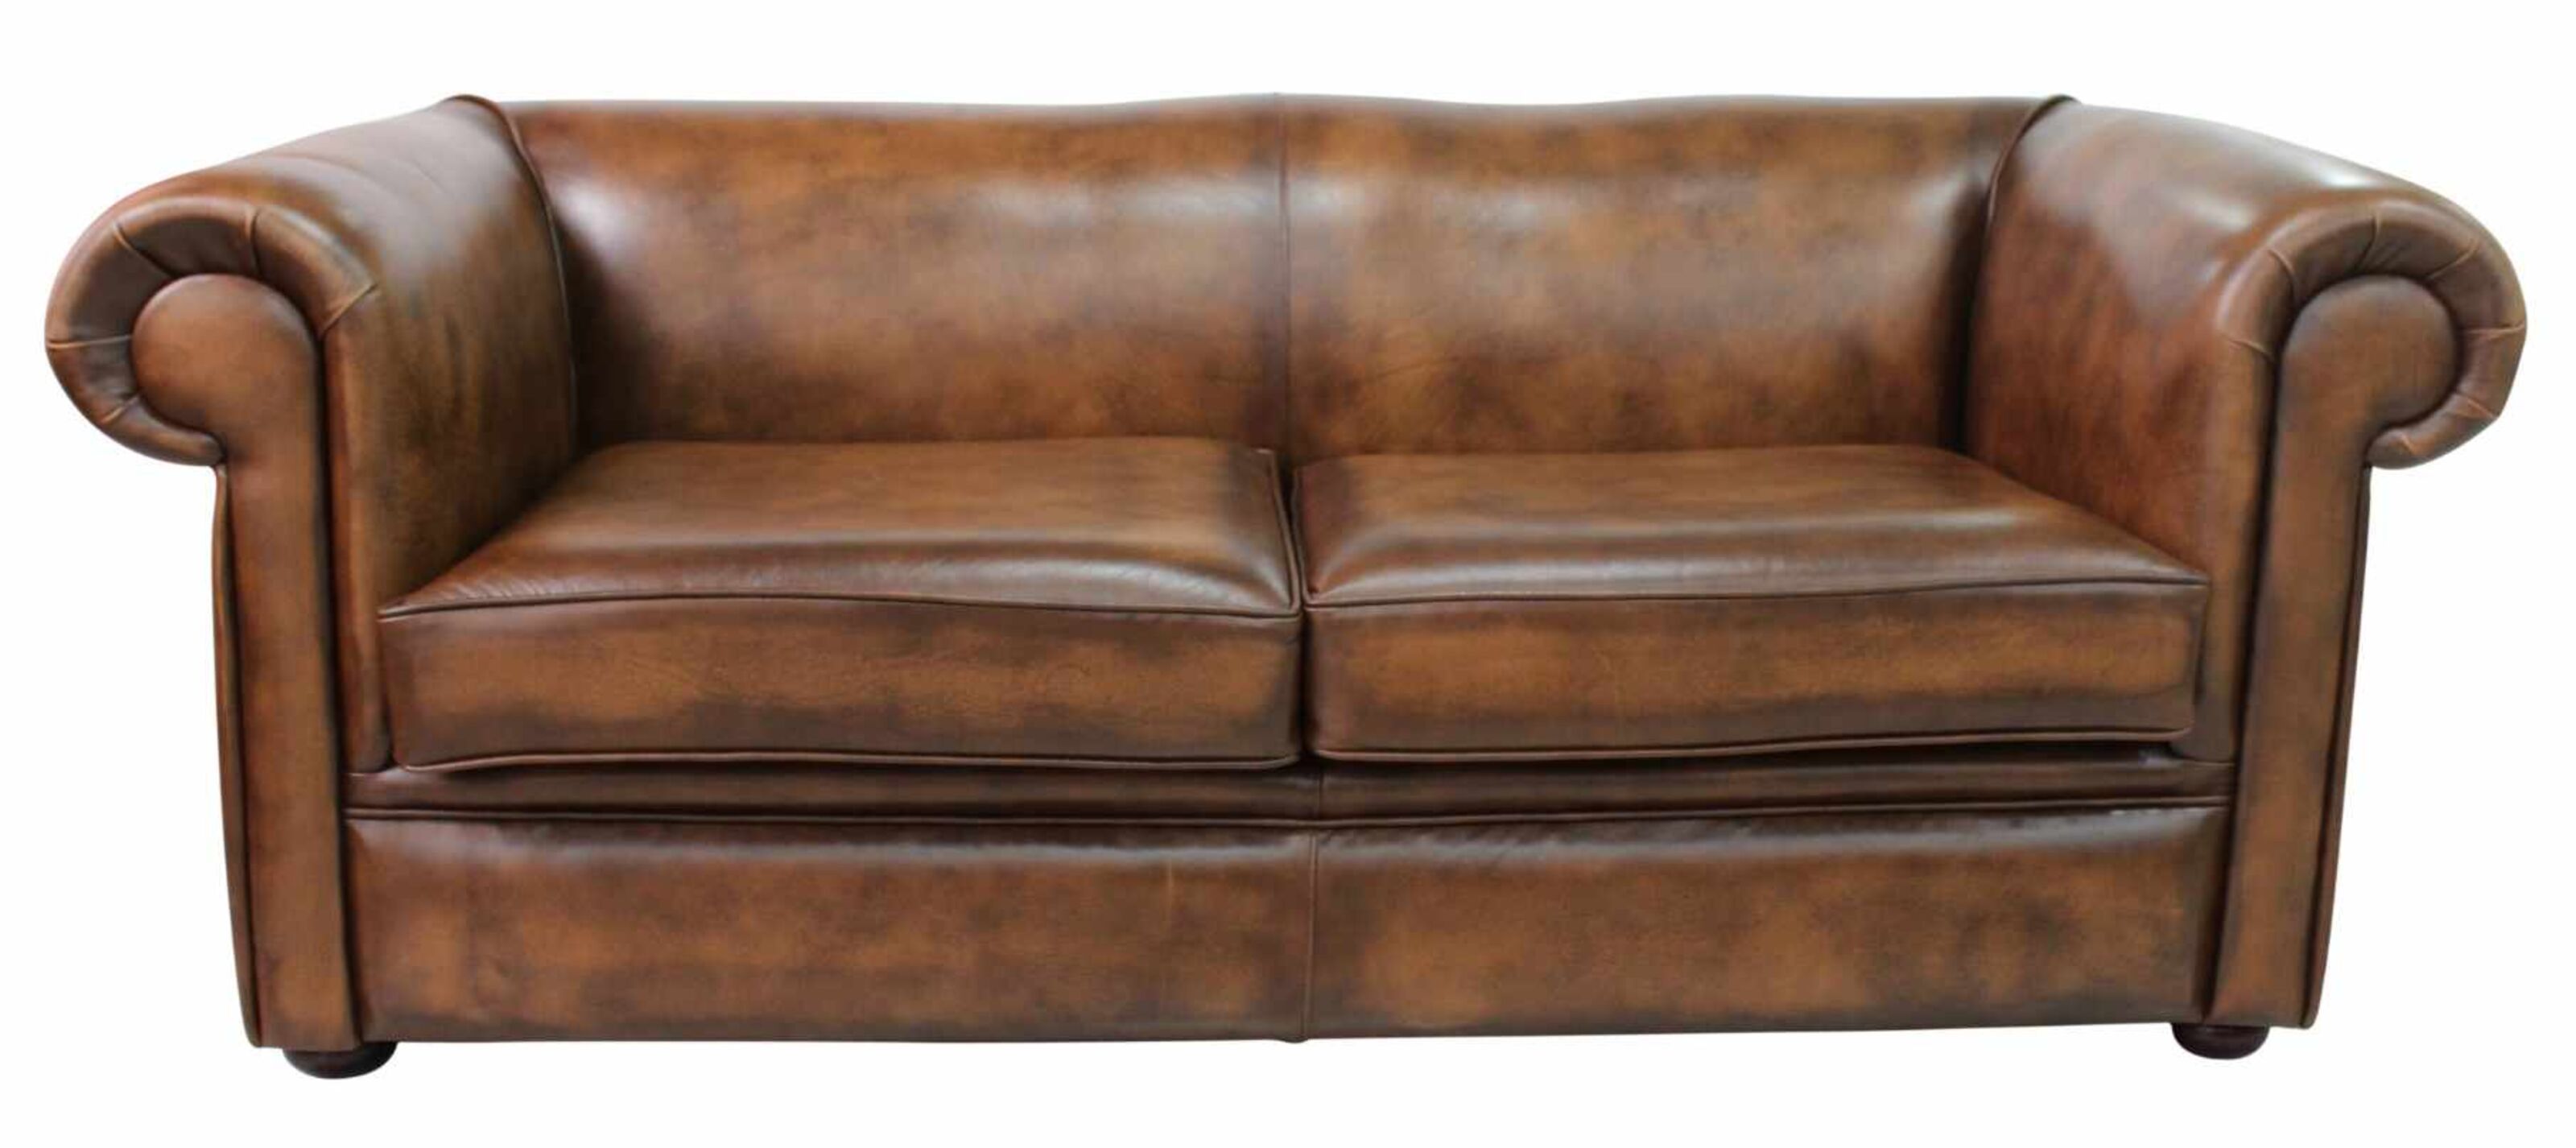 Discovering Nearby Chesterfield Sofas Your Local Source for Timeless Comfort  %Post Title